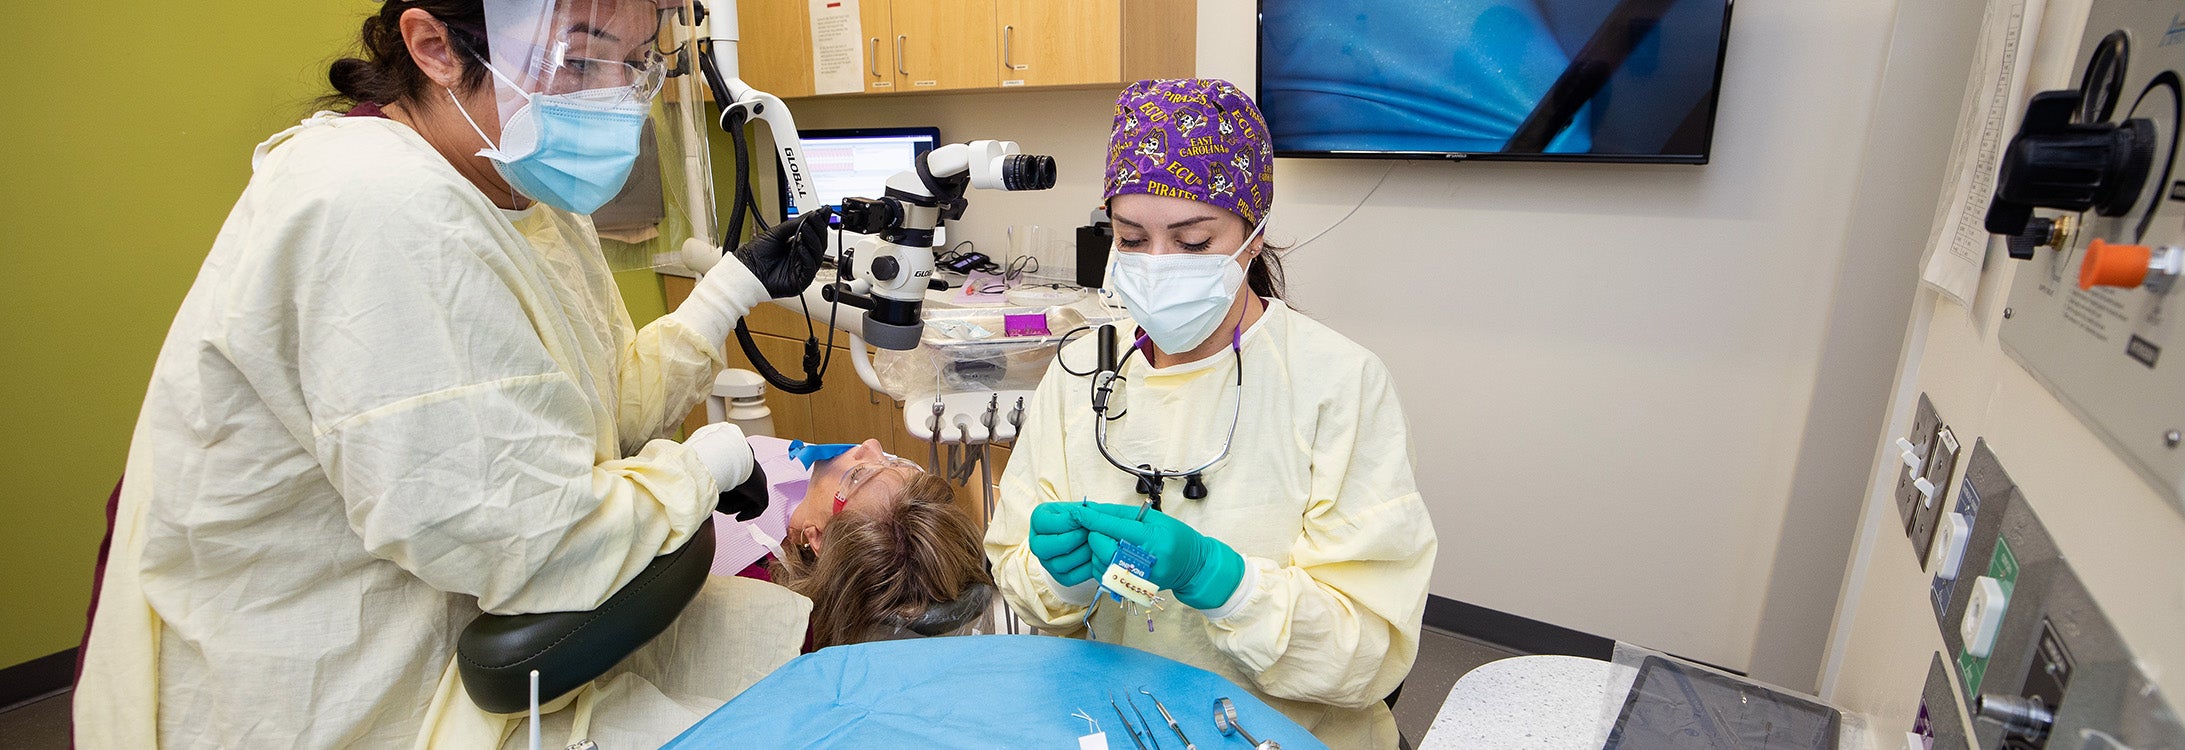 Fourth-year ECU School of Dental Medicine student Victoria Hardy prepares to perform a root canal on her mother, Barbara Hardy. The School of Dental Medicine is celebrating its 10th anniversary this year. (Photos by Rhett Butler)